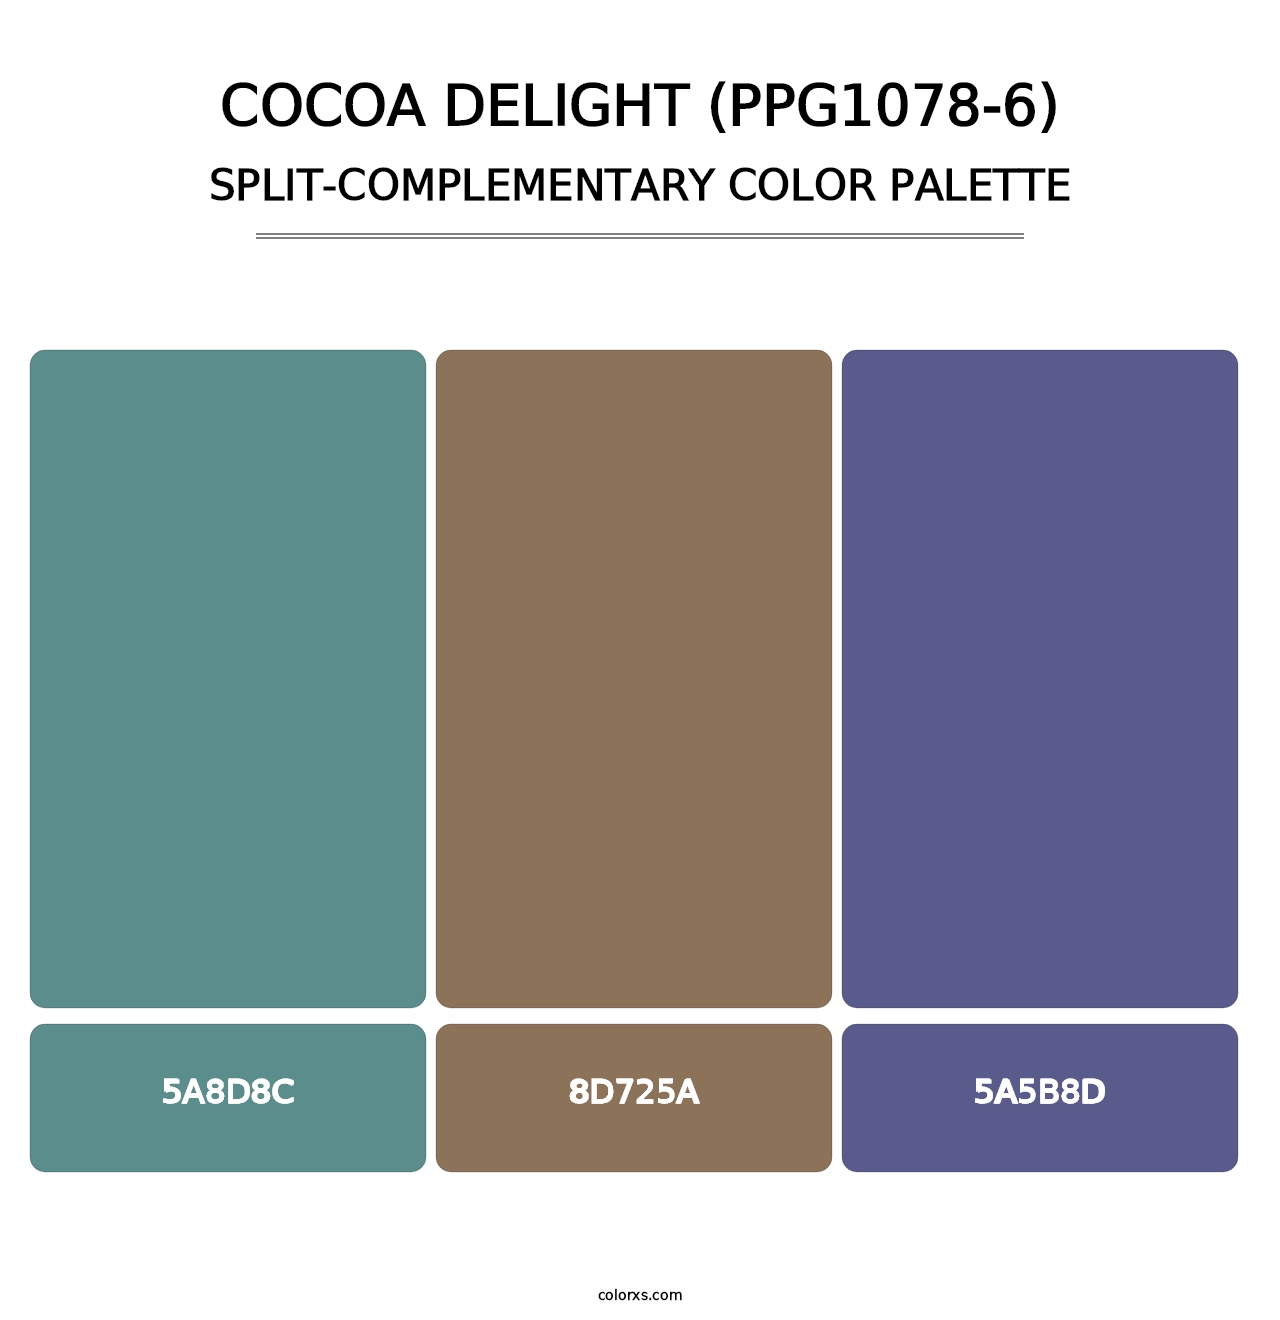 Cocoa Delight (PPG1078-6) - Split-Complementary Color Palette